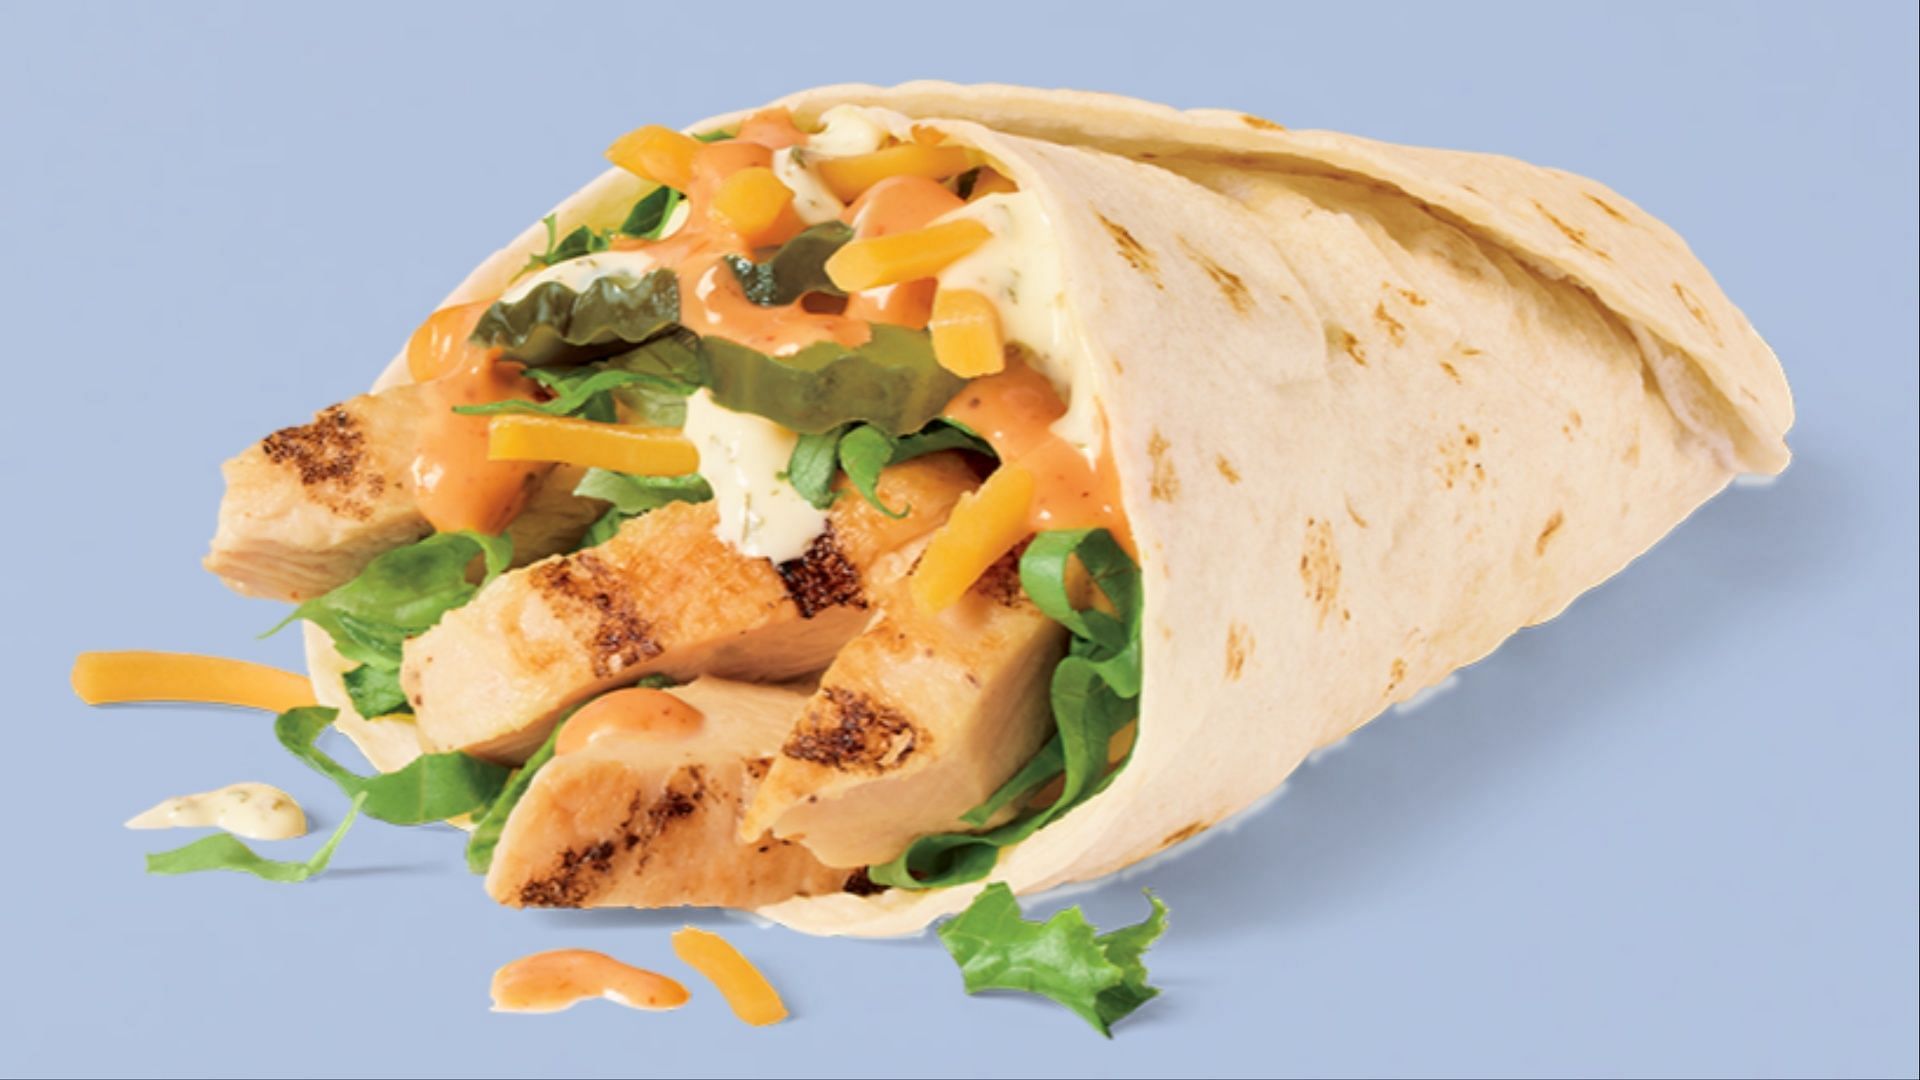 The Grilled Chicken Wraps are available all across the country starting this week (Image via Jack in the Box)